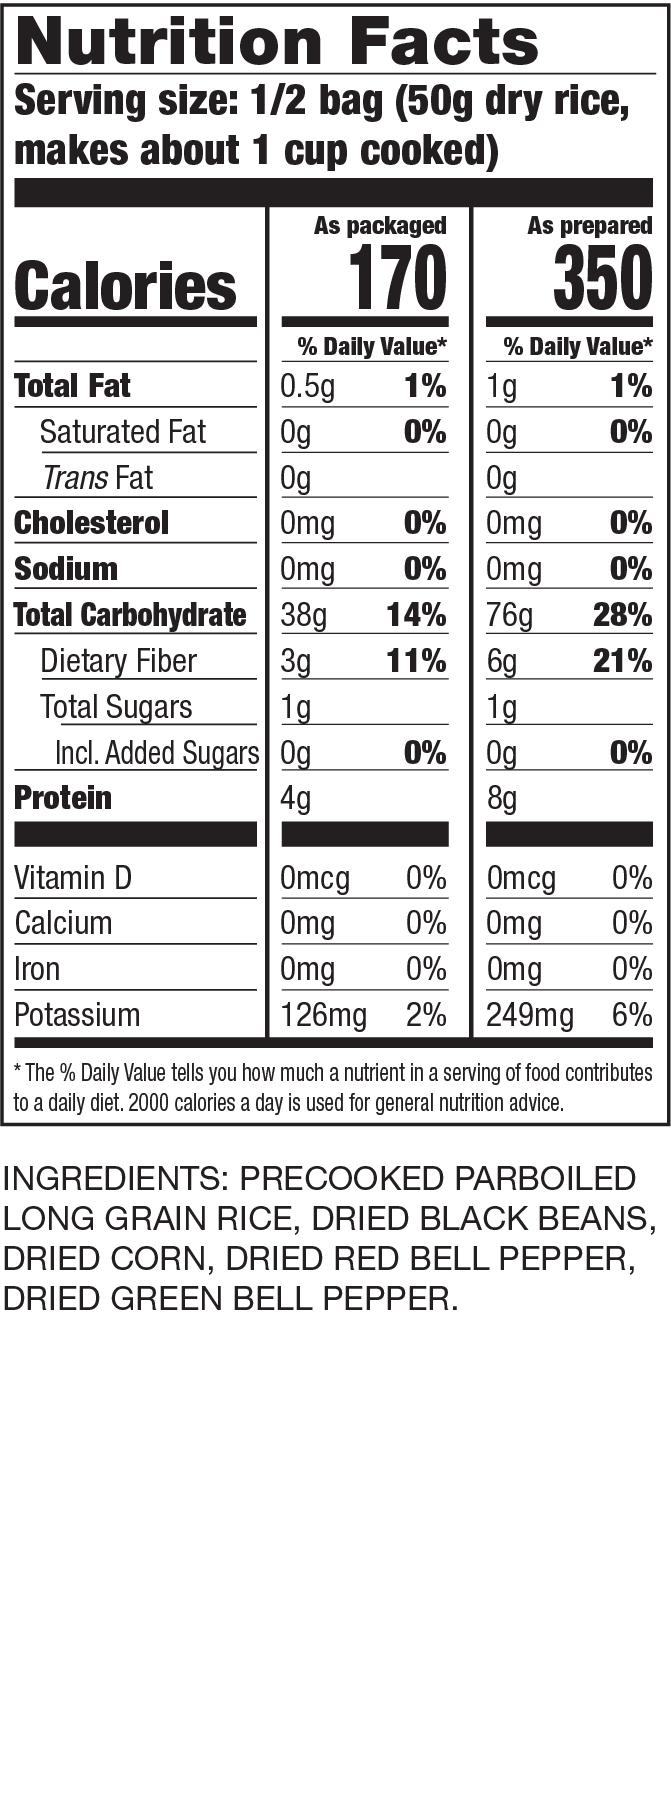 Nutrition Facts White Rice, Black Beans, Corn & Bell Peppers